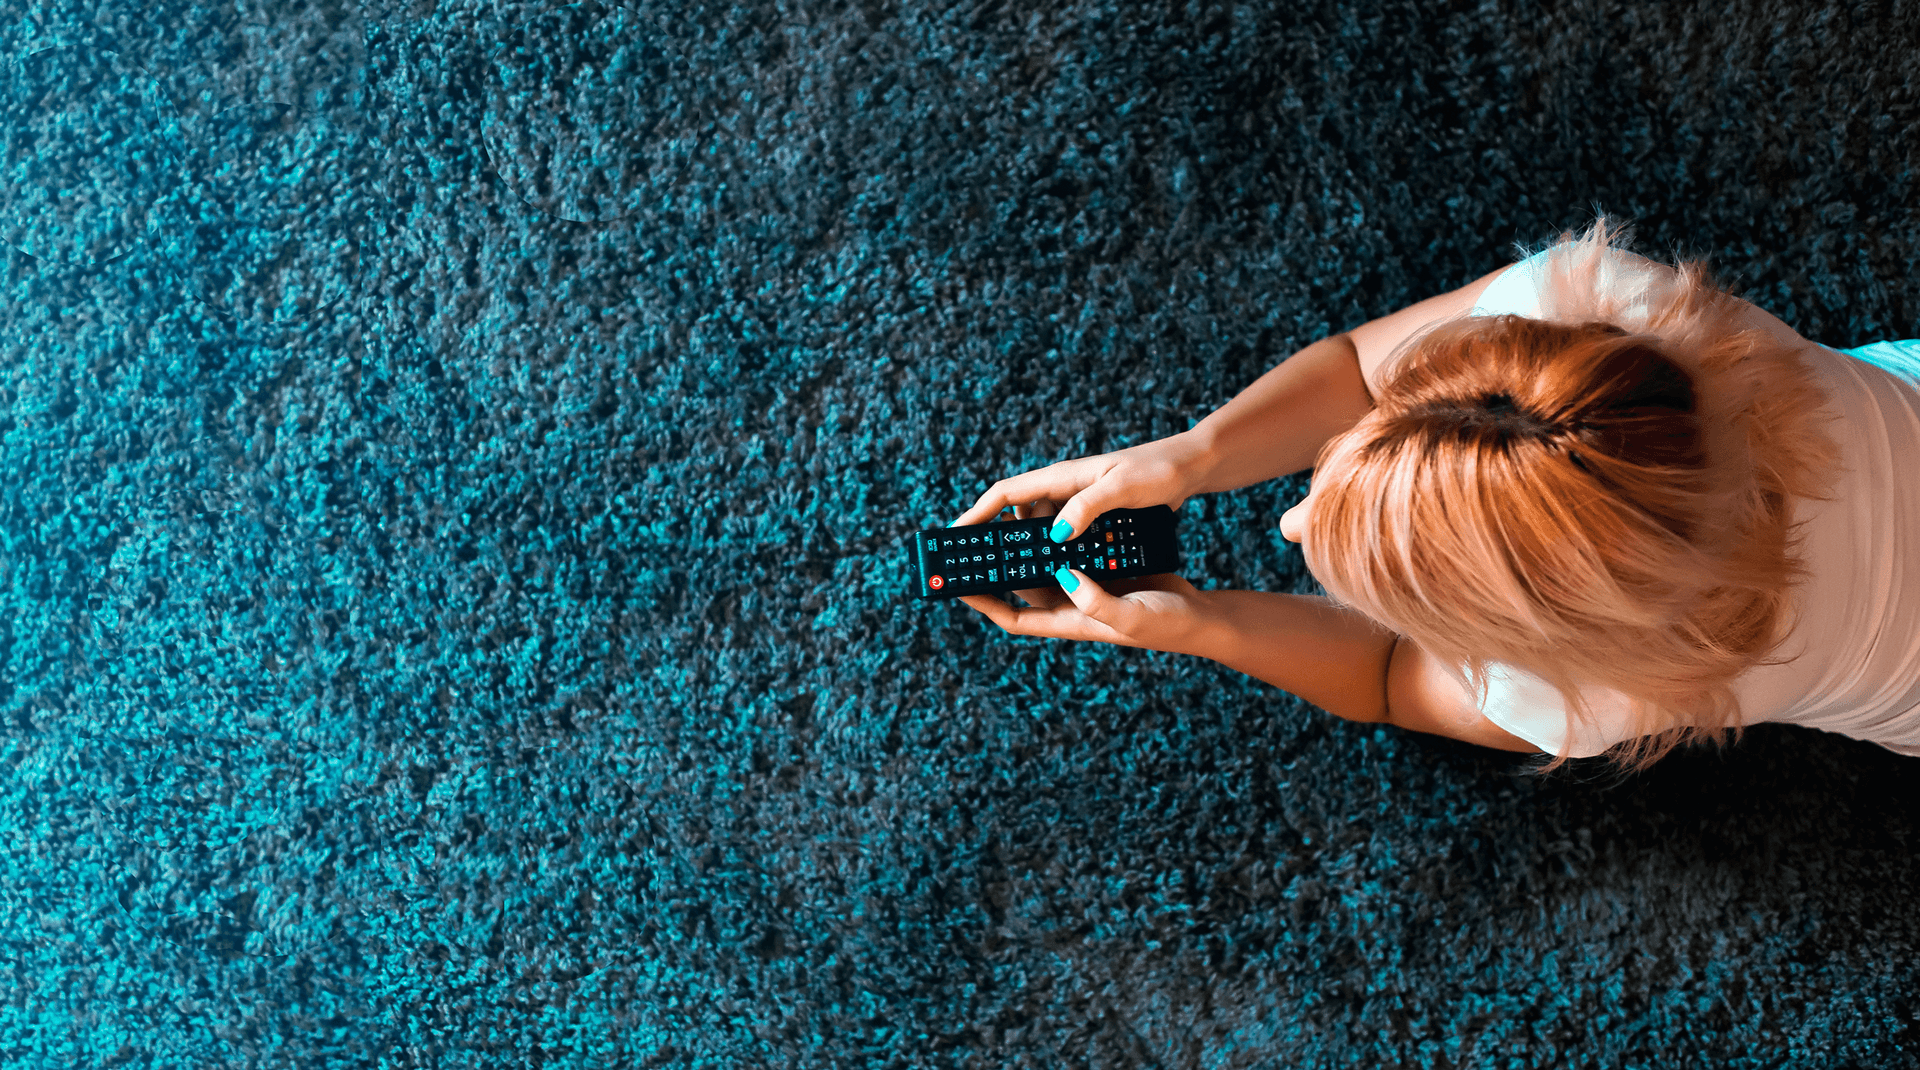 Woman on carpet with remote control